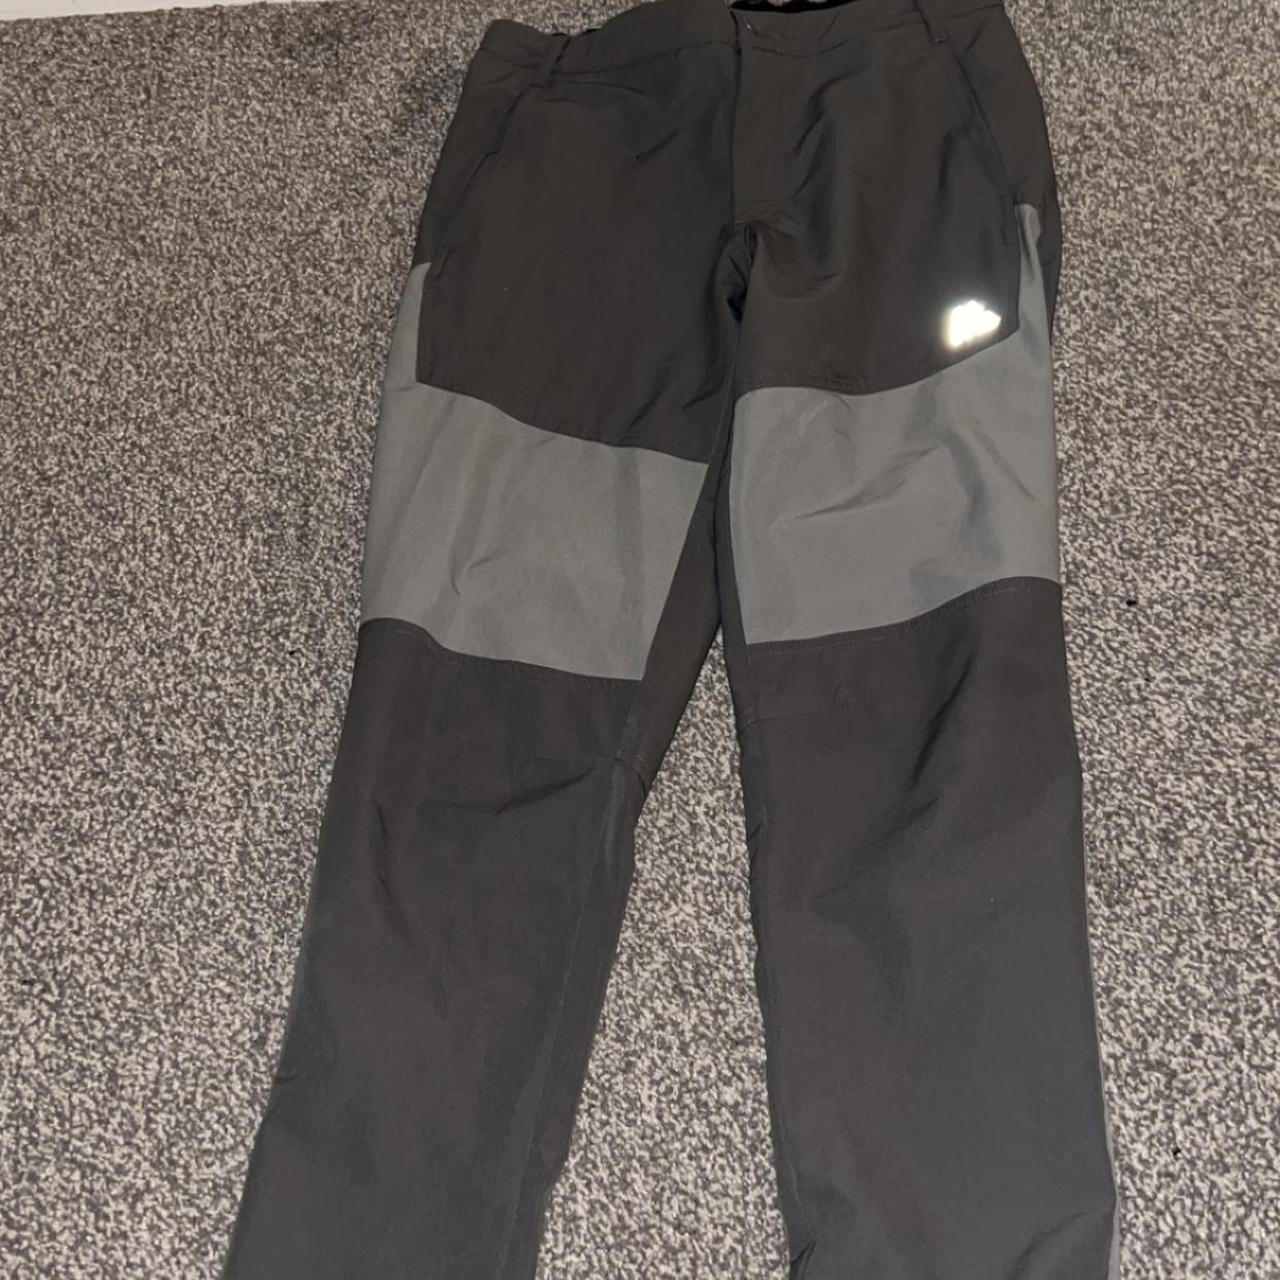 Montirex combats in Slate grey/charcoal size small - Depop